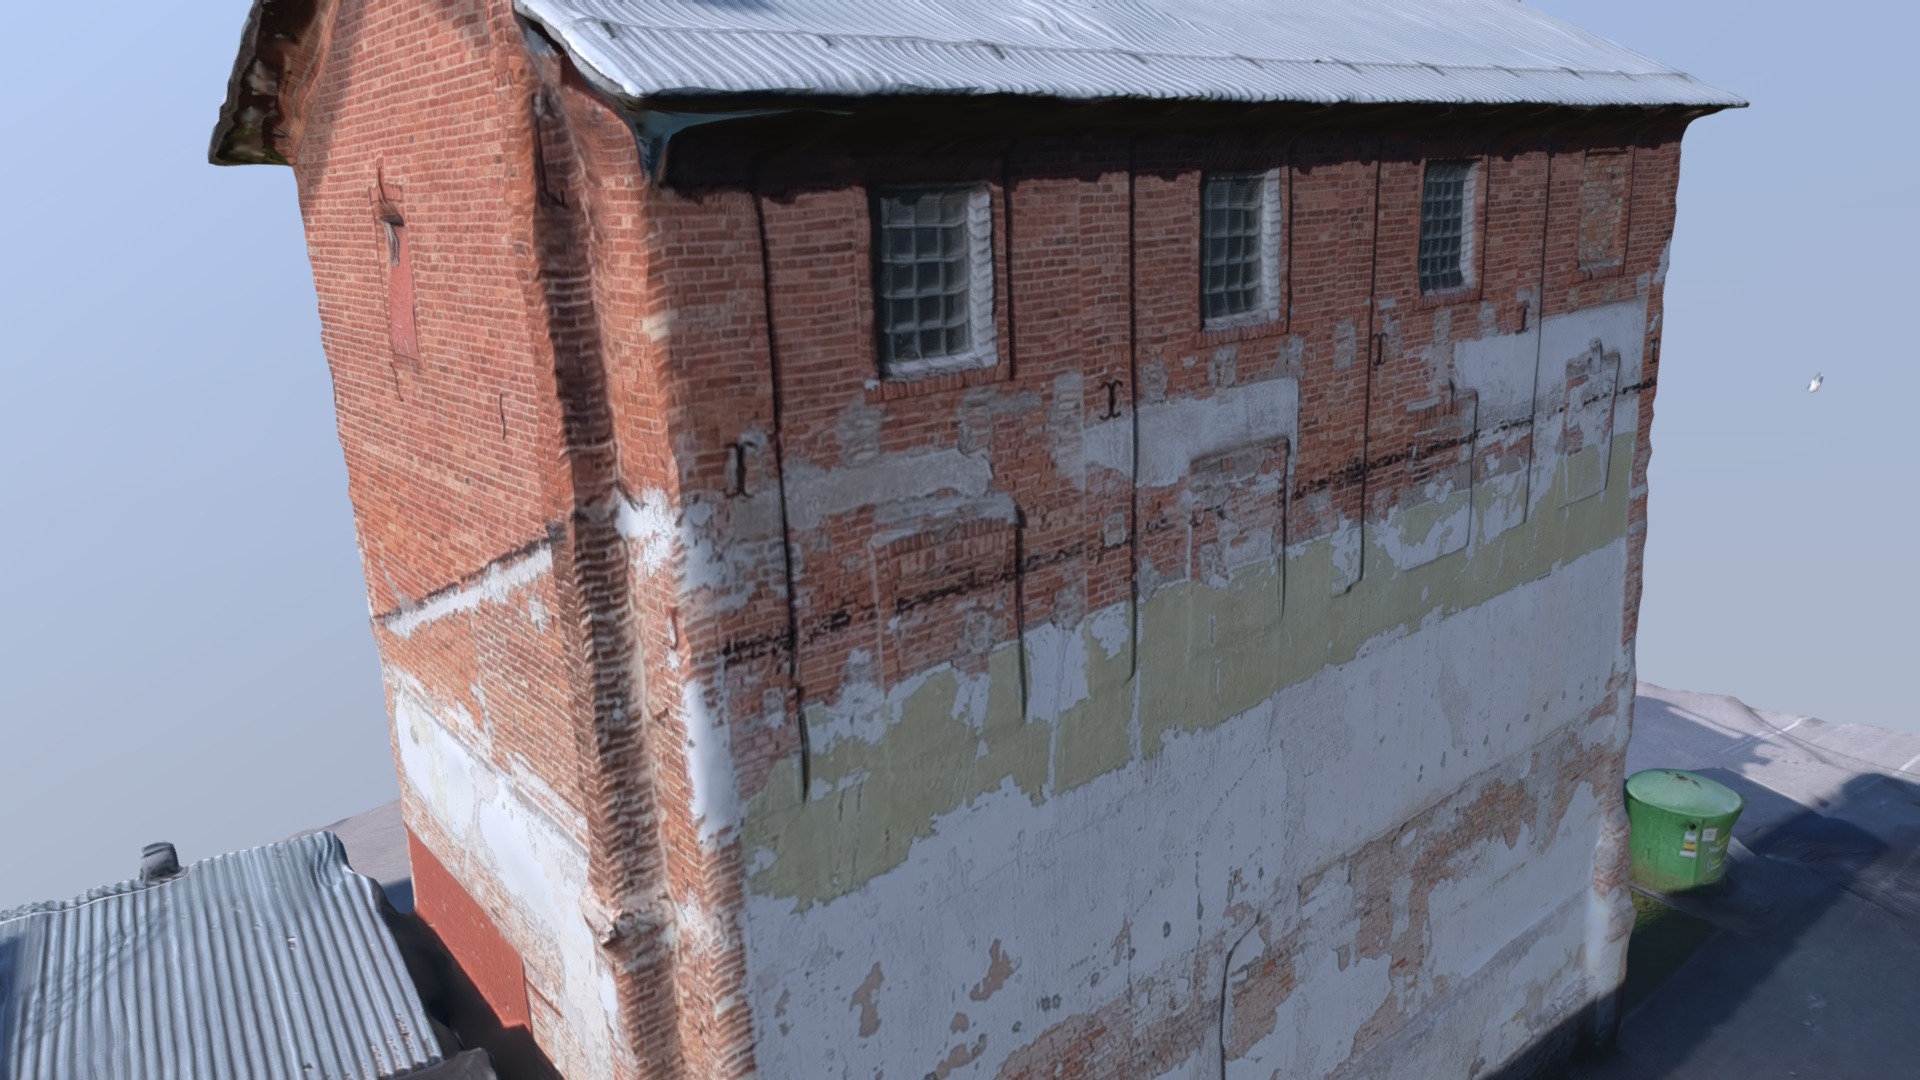 3D model Red Brick Building - This is a 3D model of the Red Brick Building. The 3D model is about a brick building with graffiti on it.